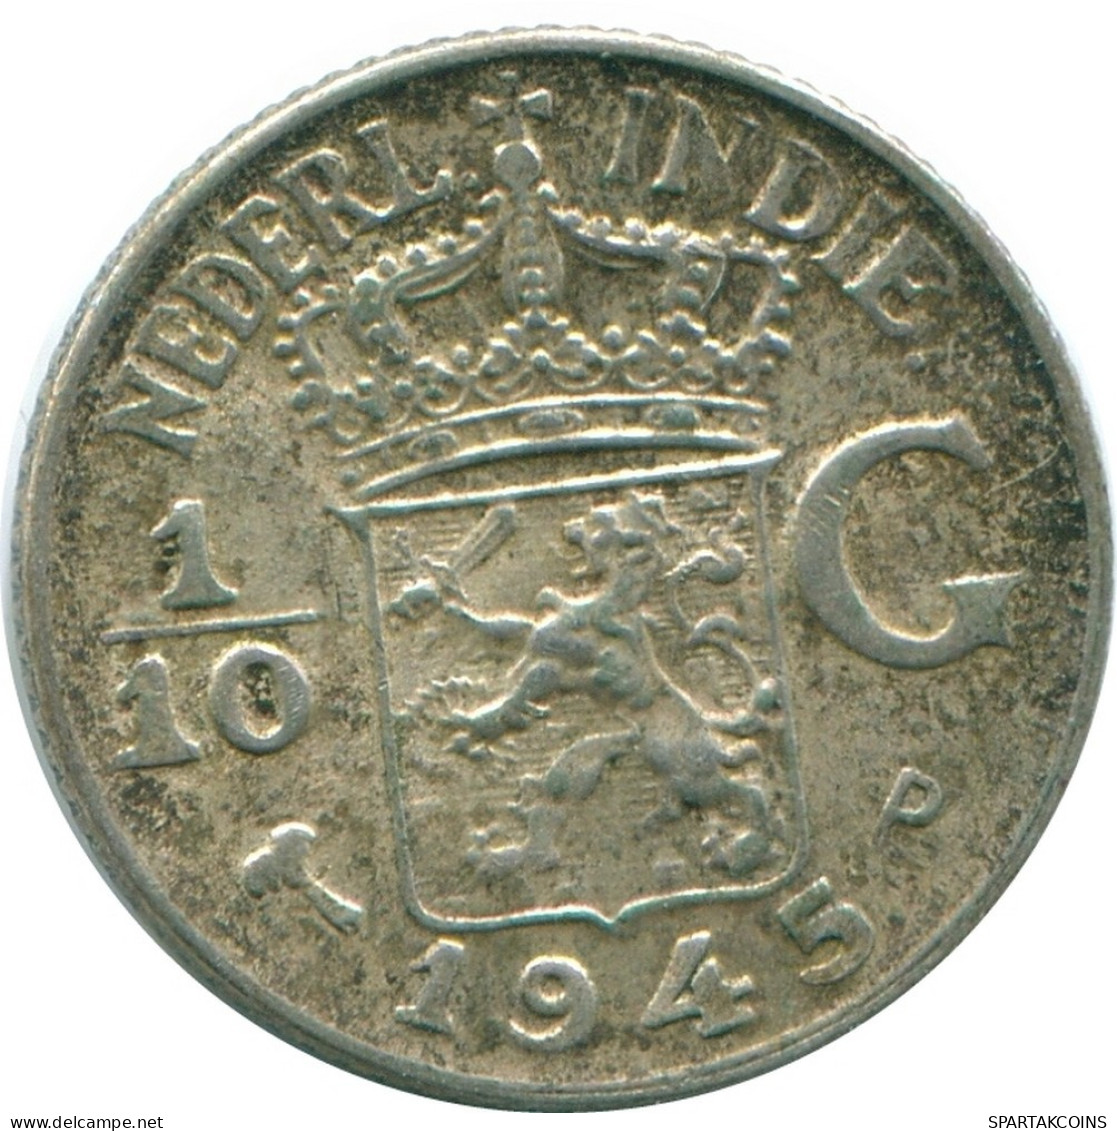 1/10 GULDEN 1945 P NETHERLANDS EAST INDIES SILVER Colonial Coin #NL14216.3.U.A - Dutch East Indies